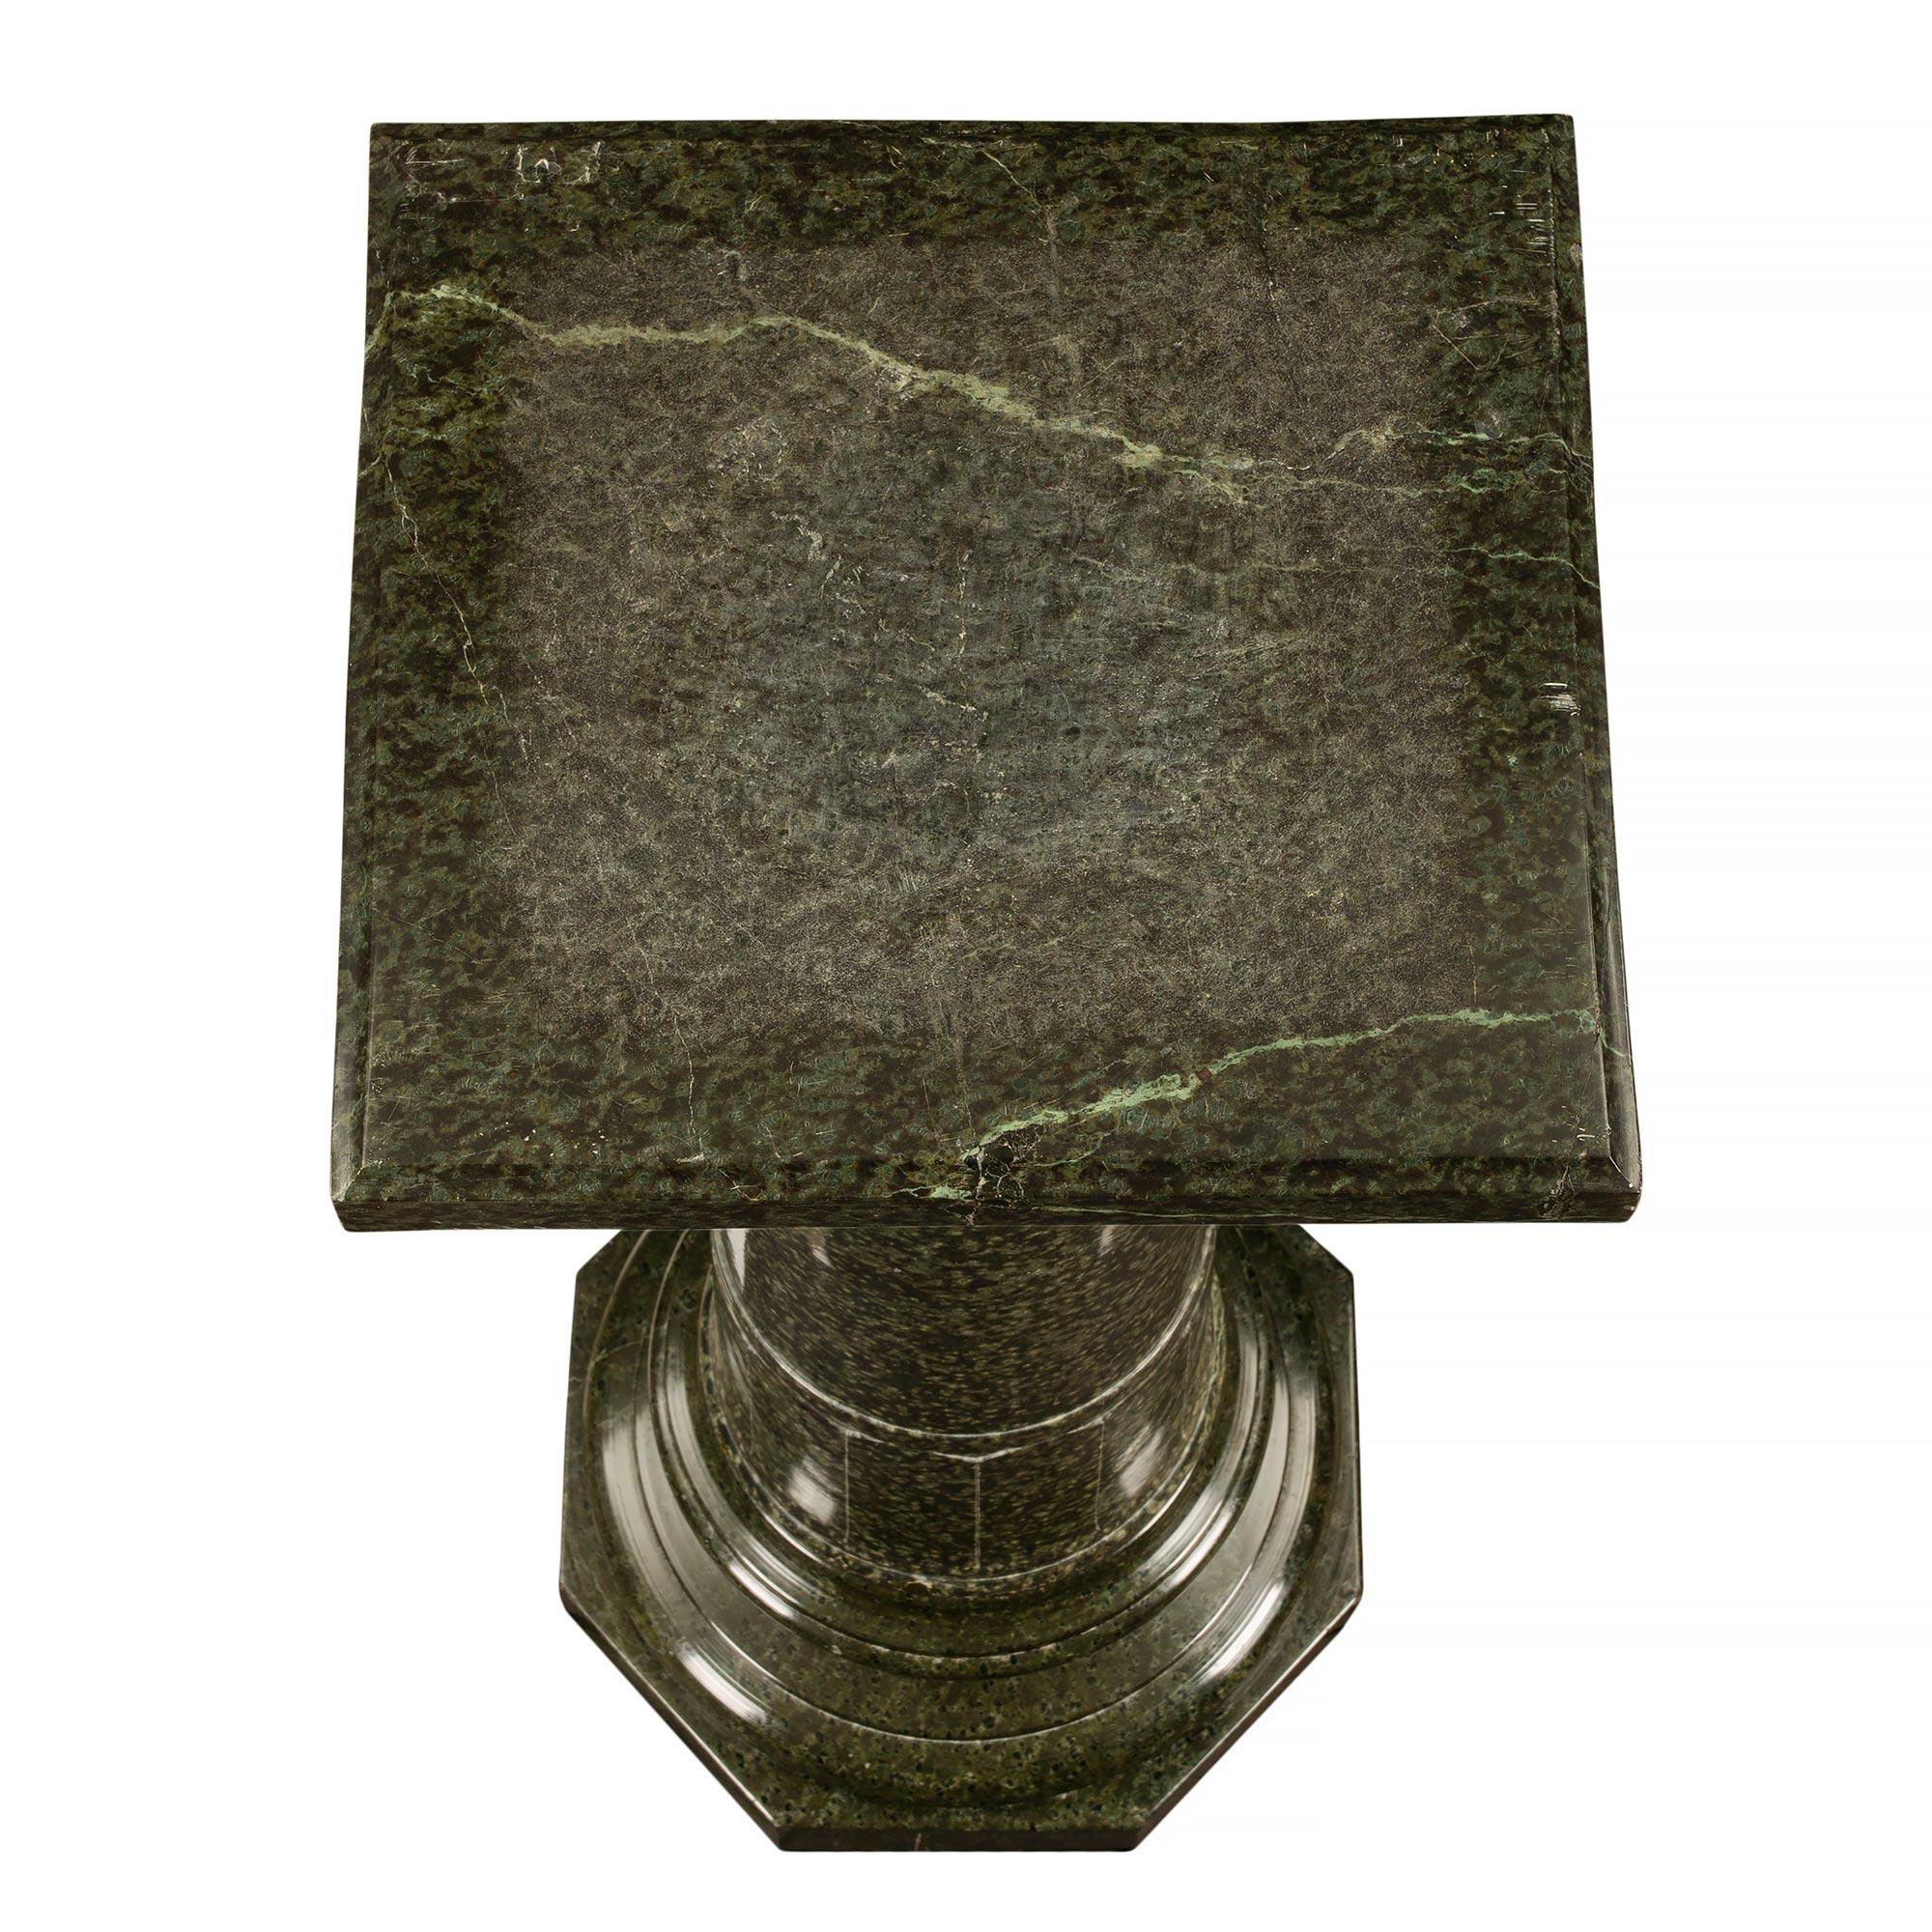 Italian 19th Century Three Piece Green Marble Pedestal In Good Condition For Sale In West Palm Beach, FL